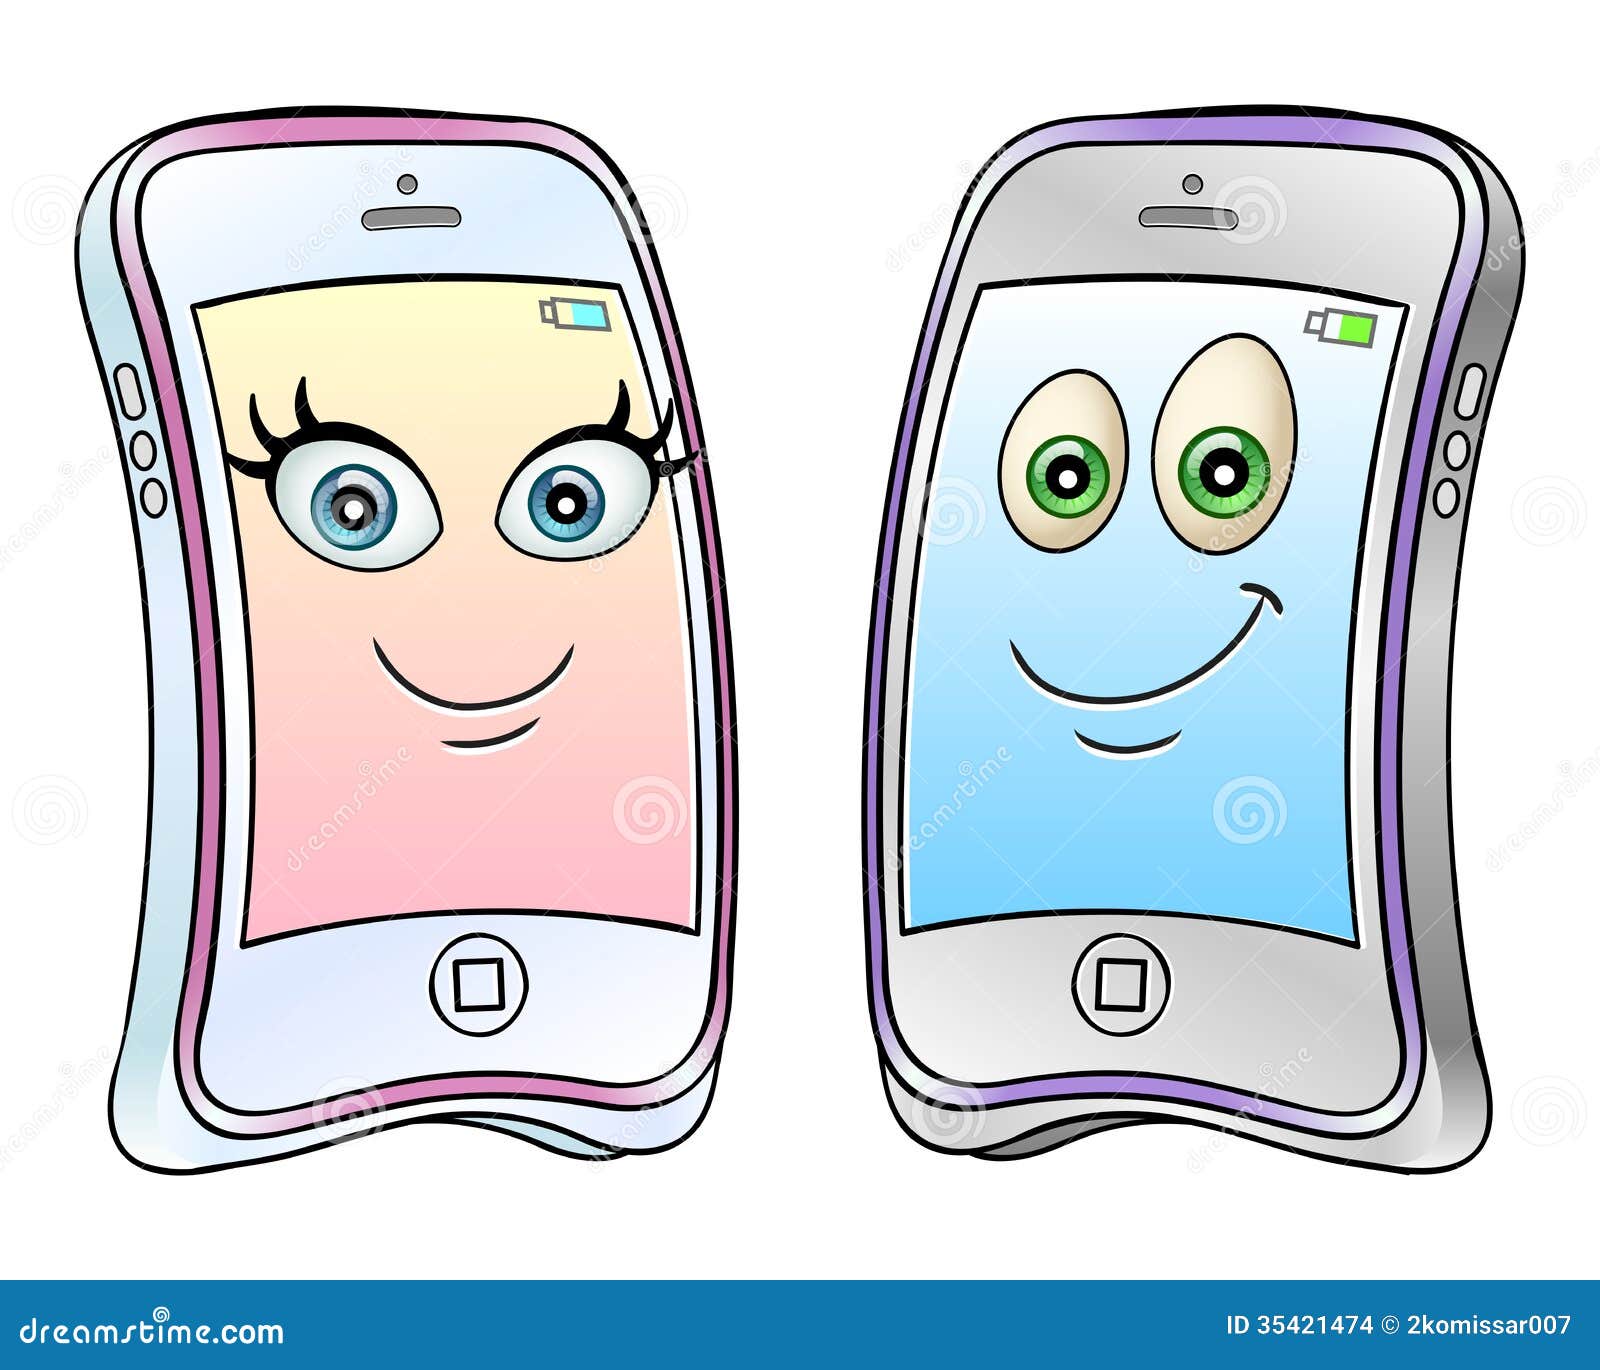 Cartoon Mobile Phones Stock Images - Image: 35421474